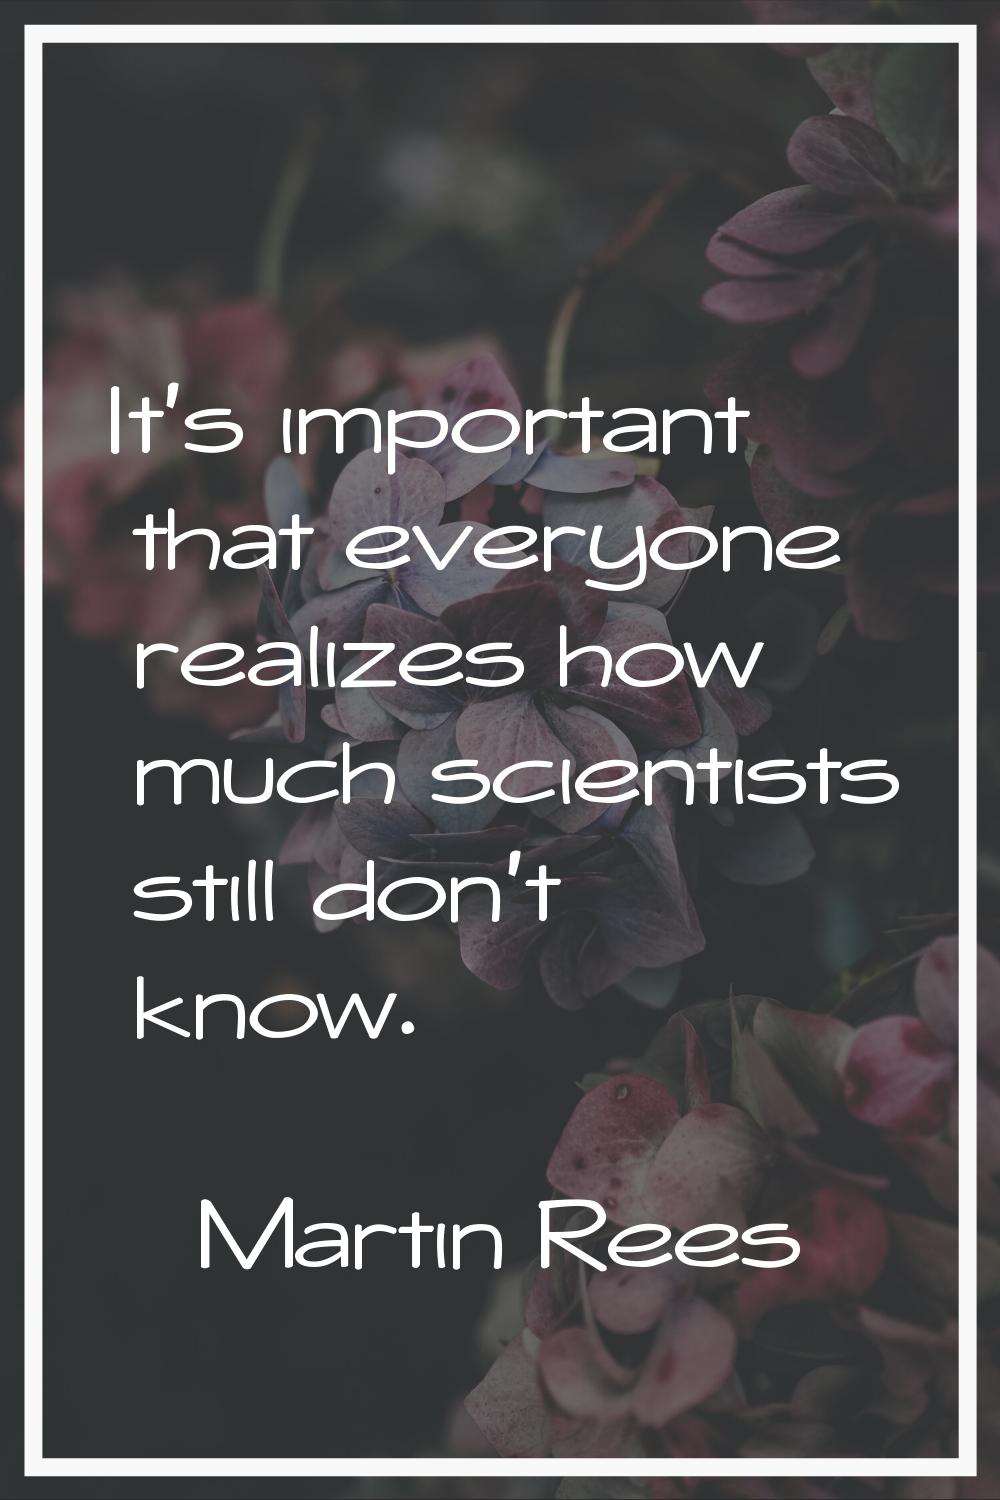 It's important that everyone realizes how much scientists still don't know.